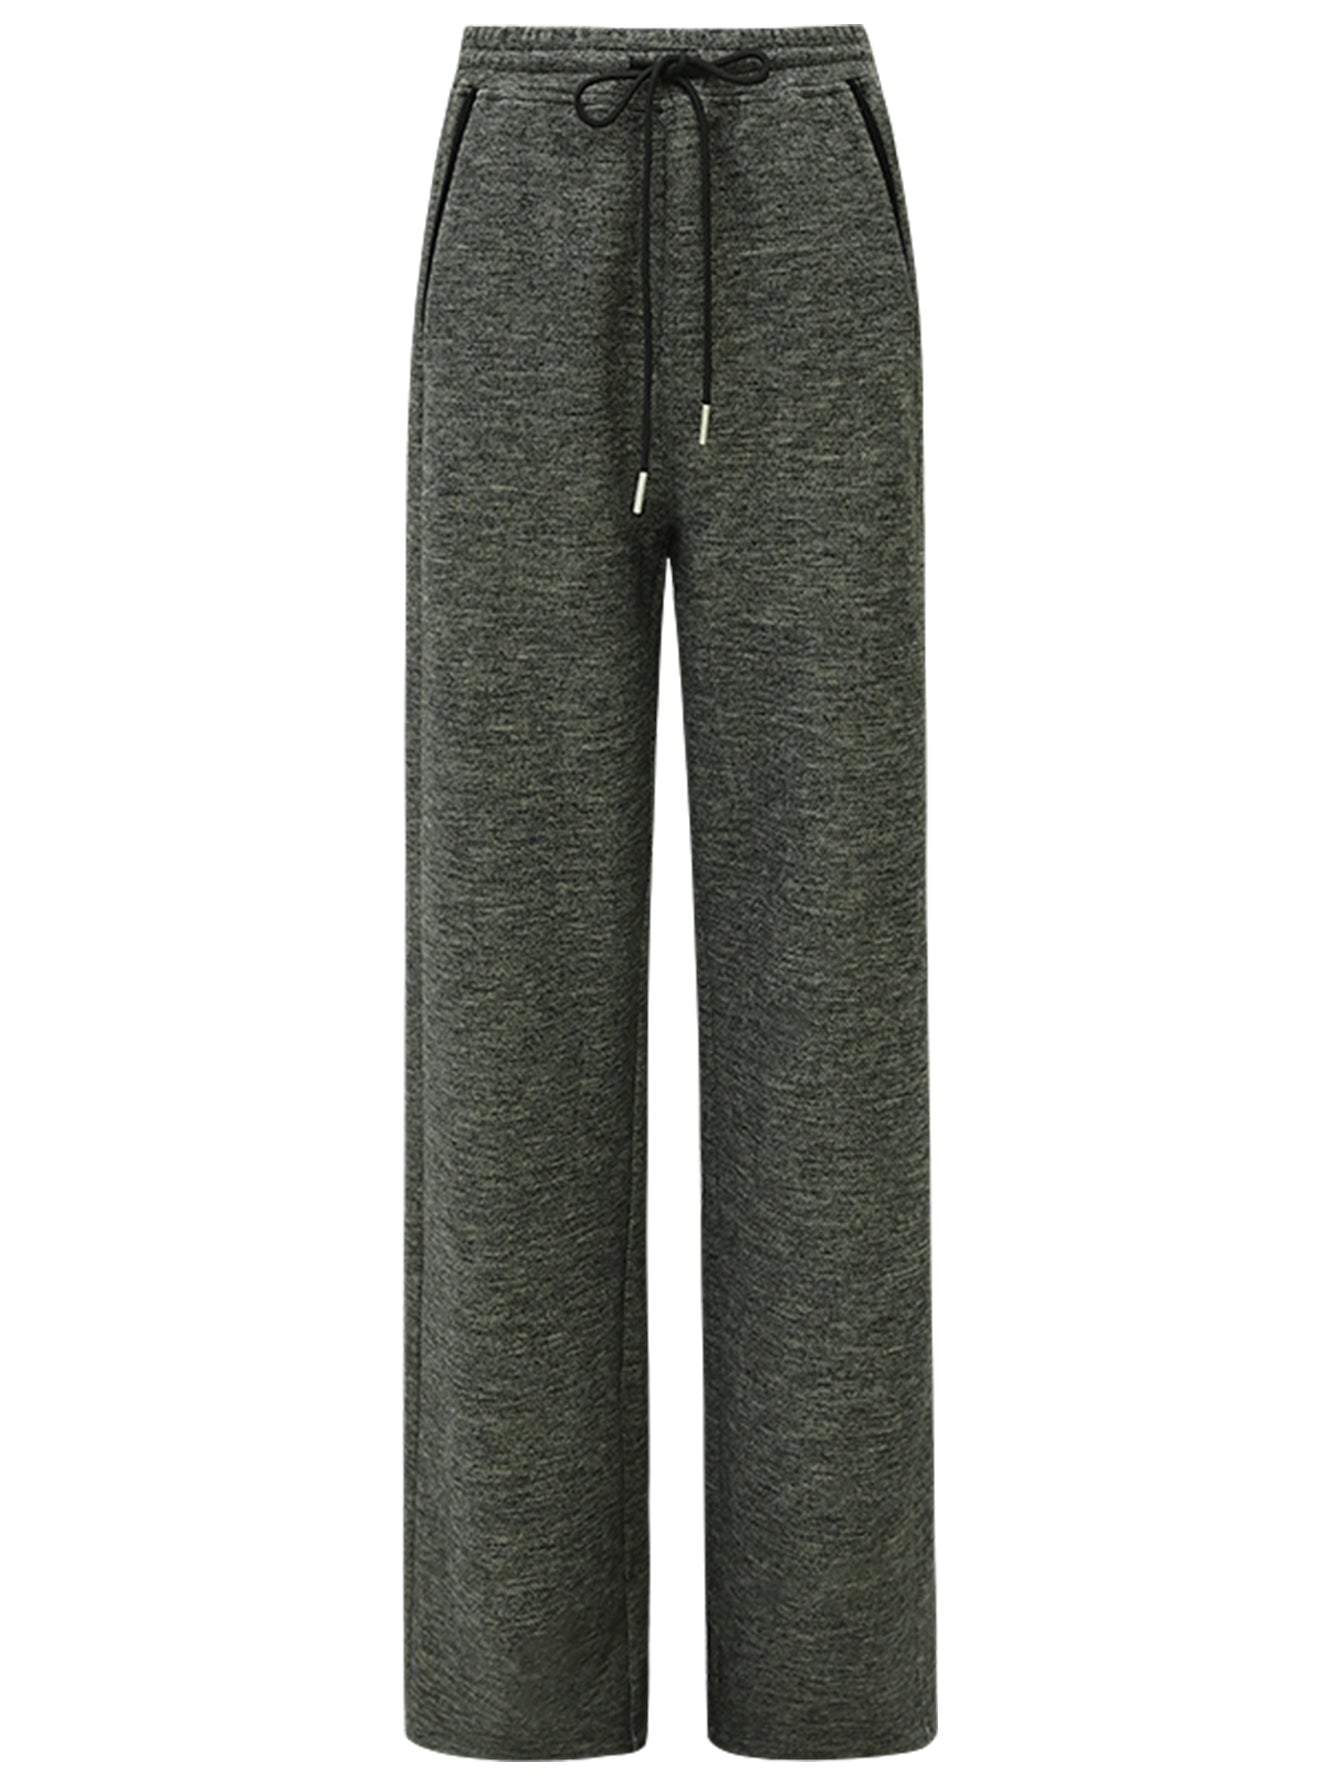 casual-knitted-pants-with-side-pockets-in-charcoal_all_charcoal_4.jpg